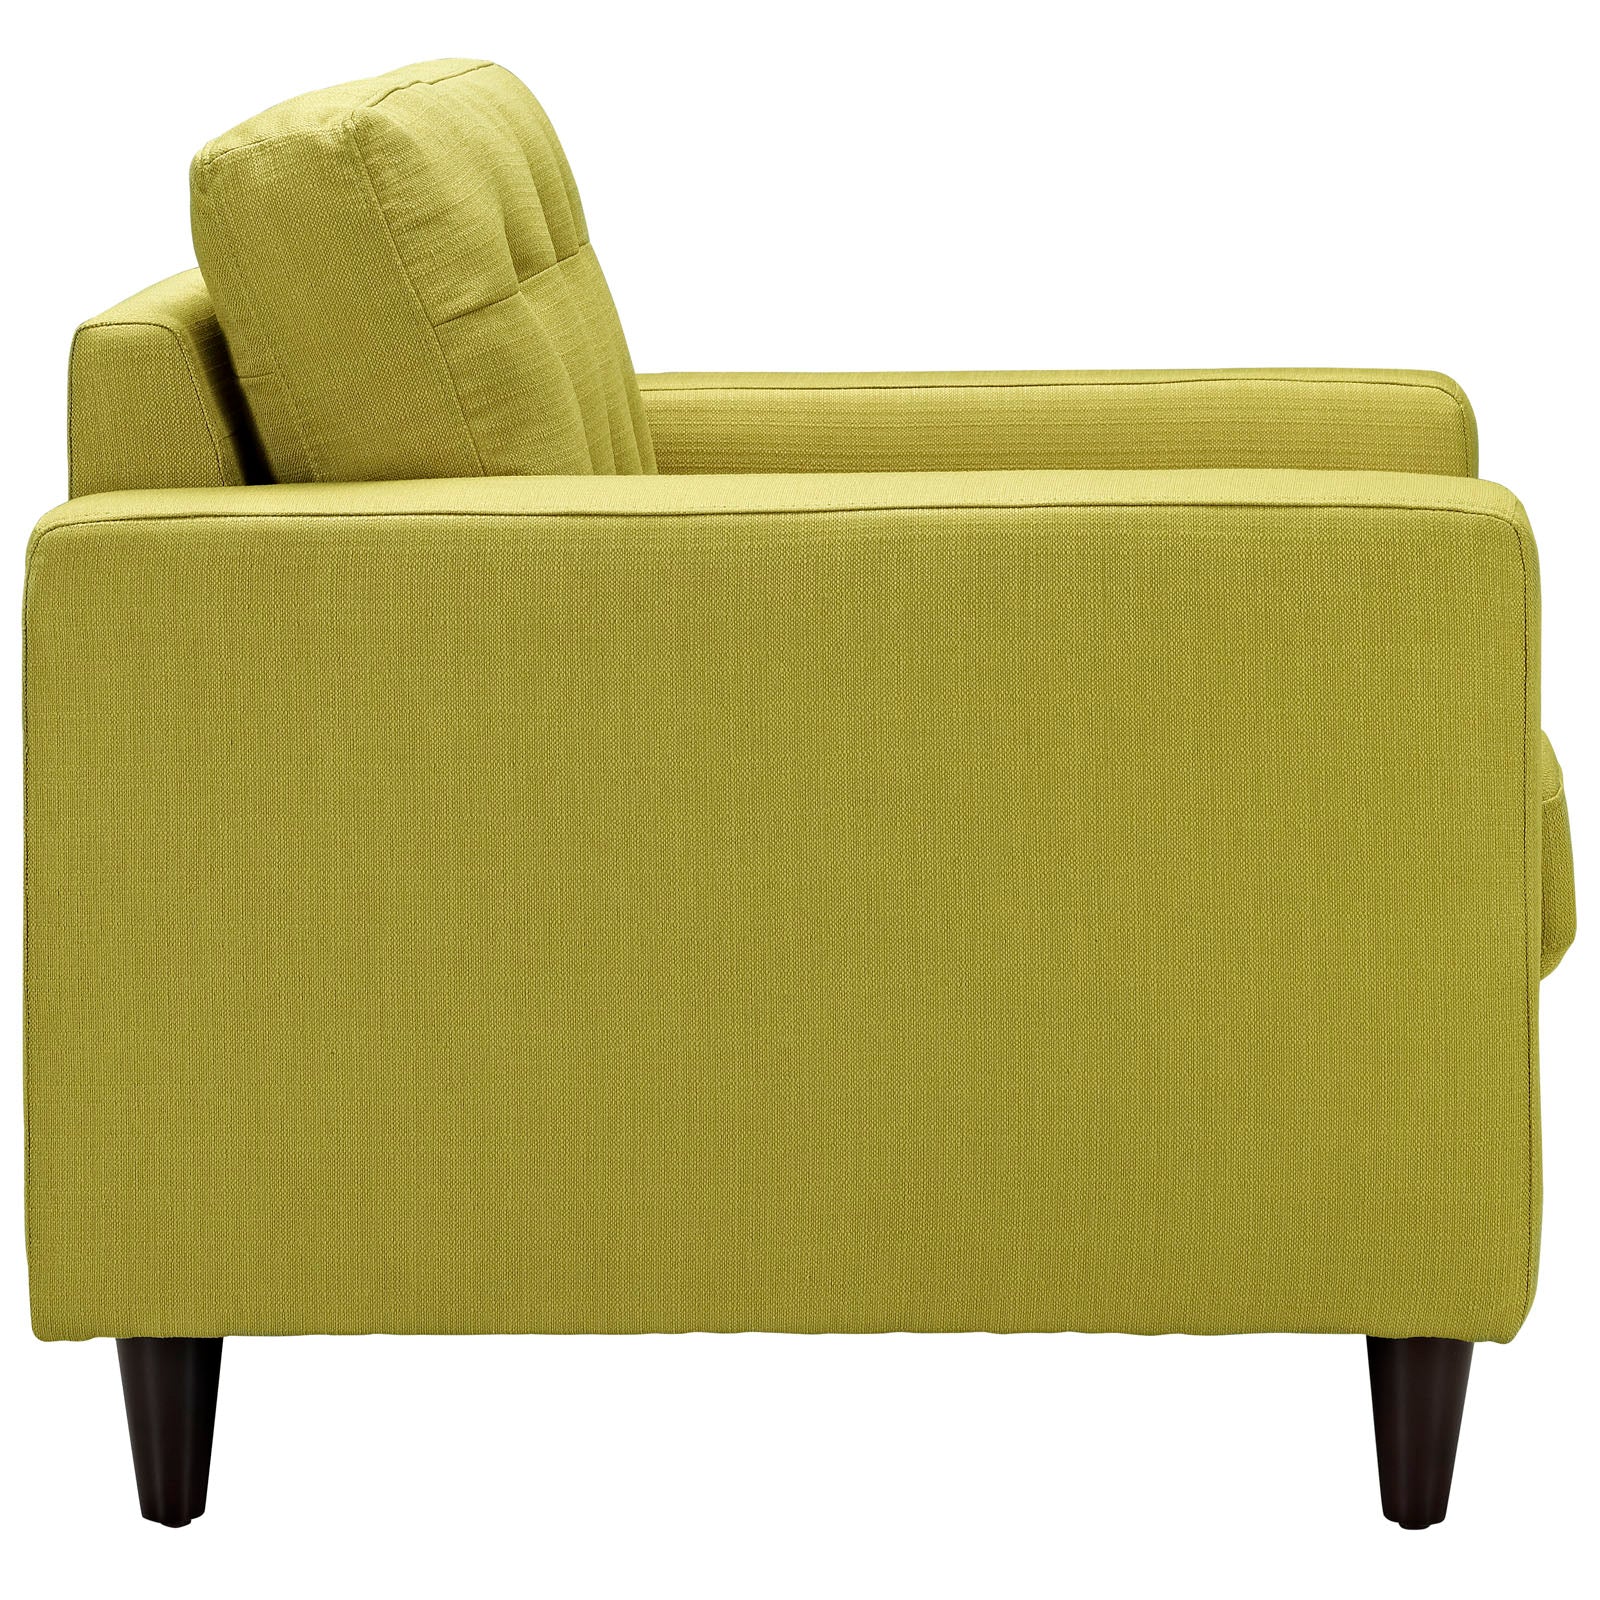 Modway Living Room Sets - Empress Armchair And Sofa Set Of 2 Wheatgrass